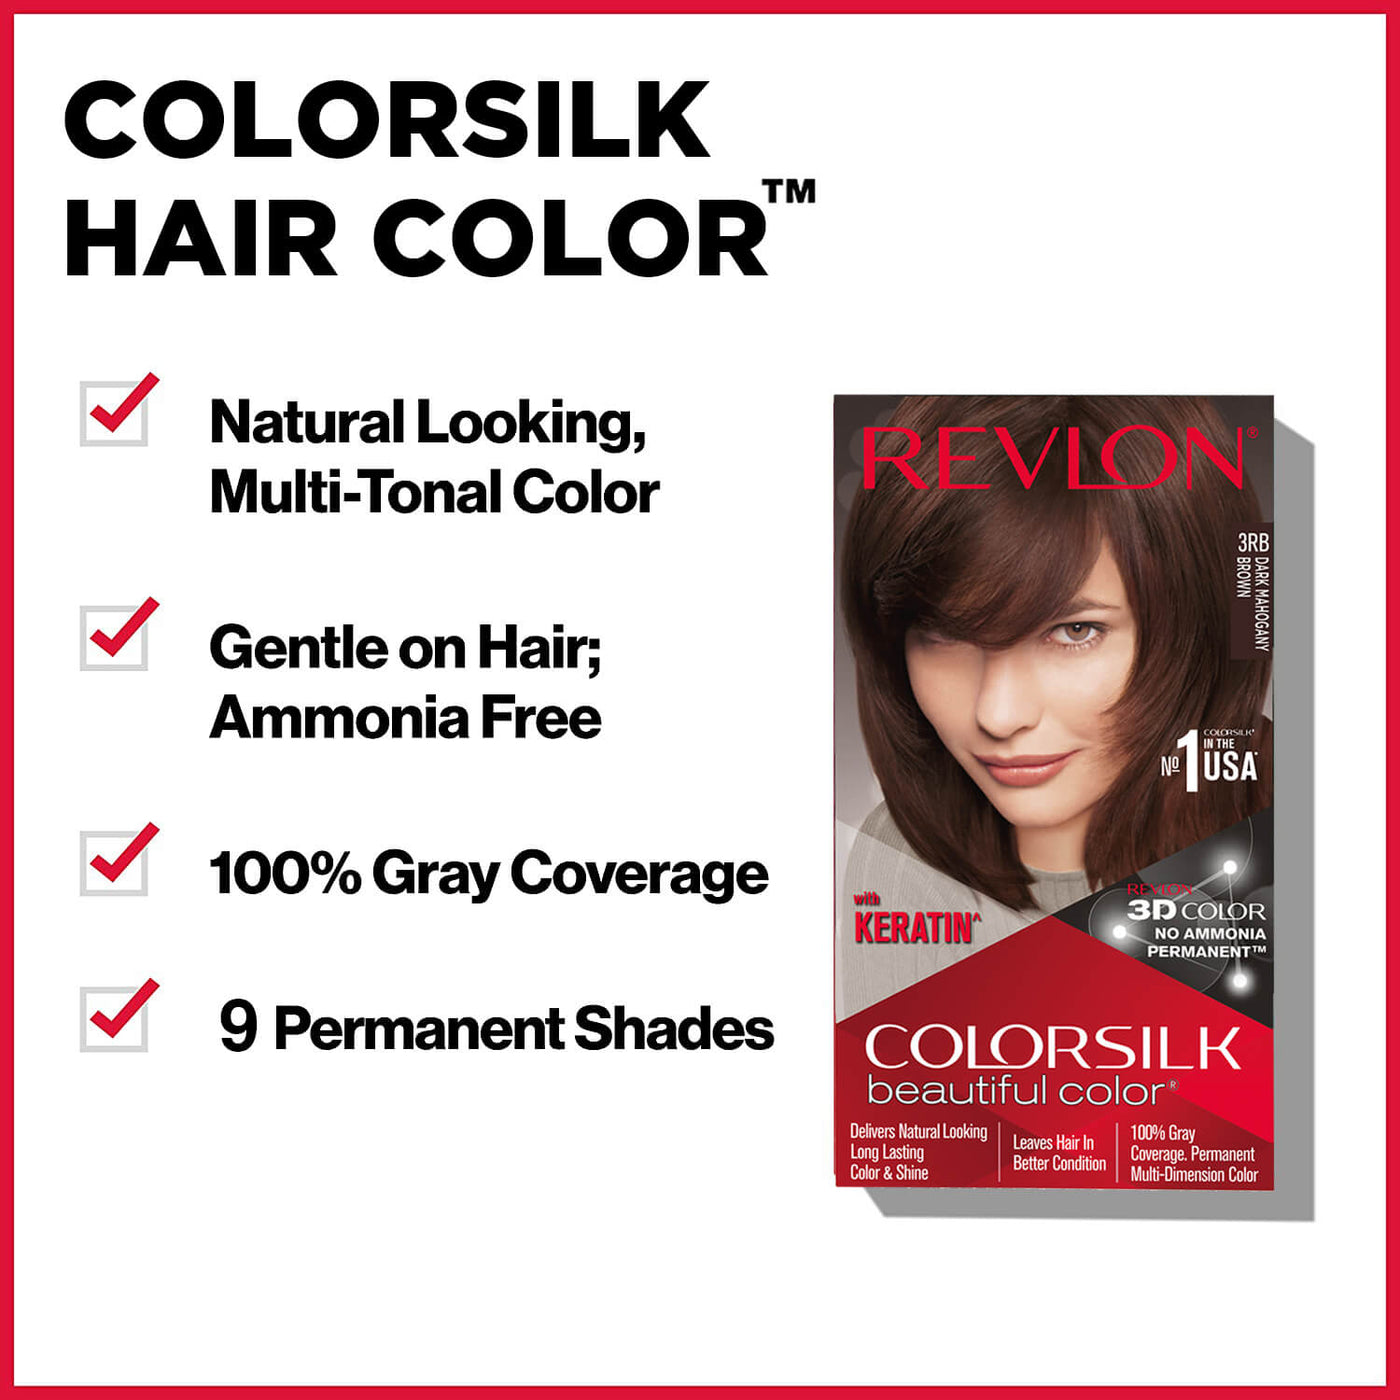 Revlon ColorSilk with Keratin (with Outrageous Shampoo 90 ml) - Special Offer